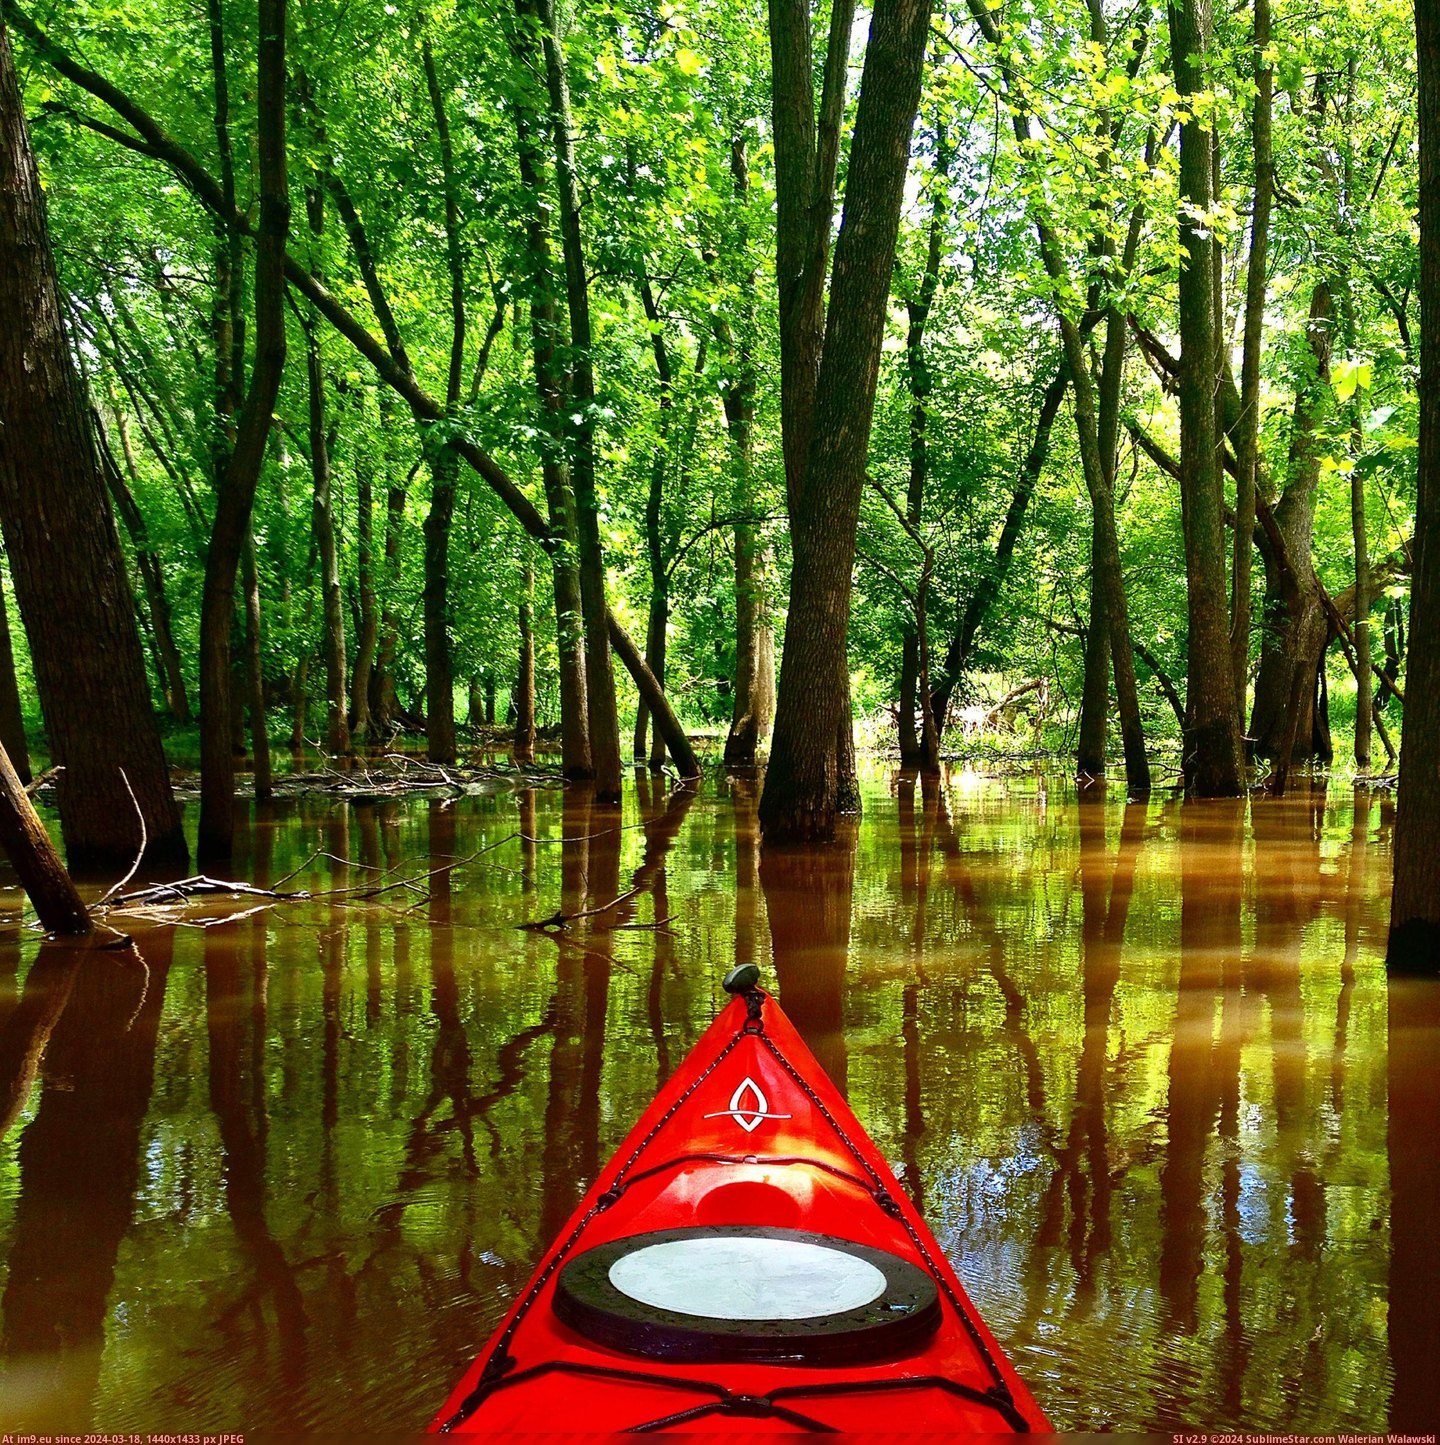 #Day #Spent #Kayaking #Flooding #Forest #Area [Pics] There has been some flooding in my area recently so I spent the day kayaking through the forest Pic. (Obraz z album My r/PICS favs))